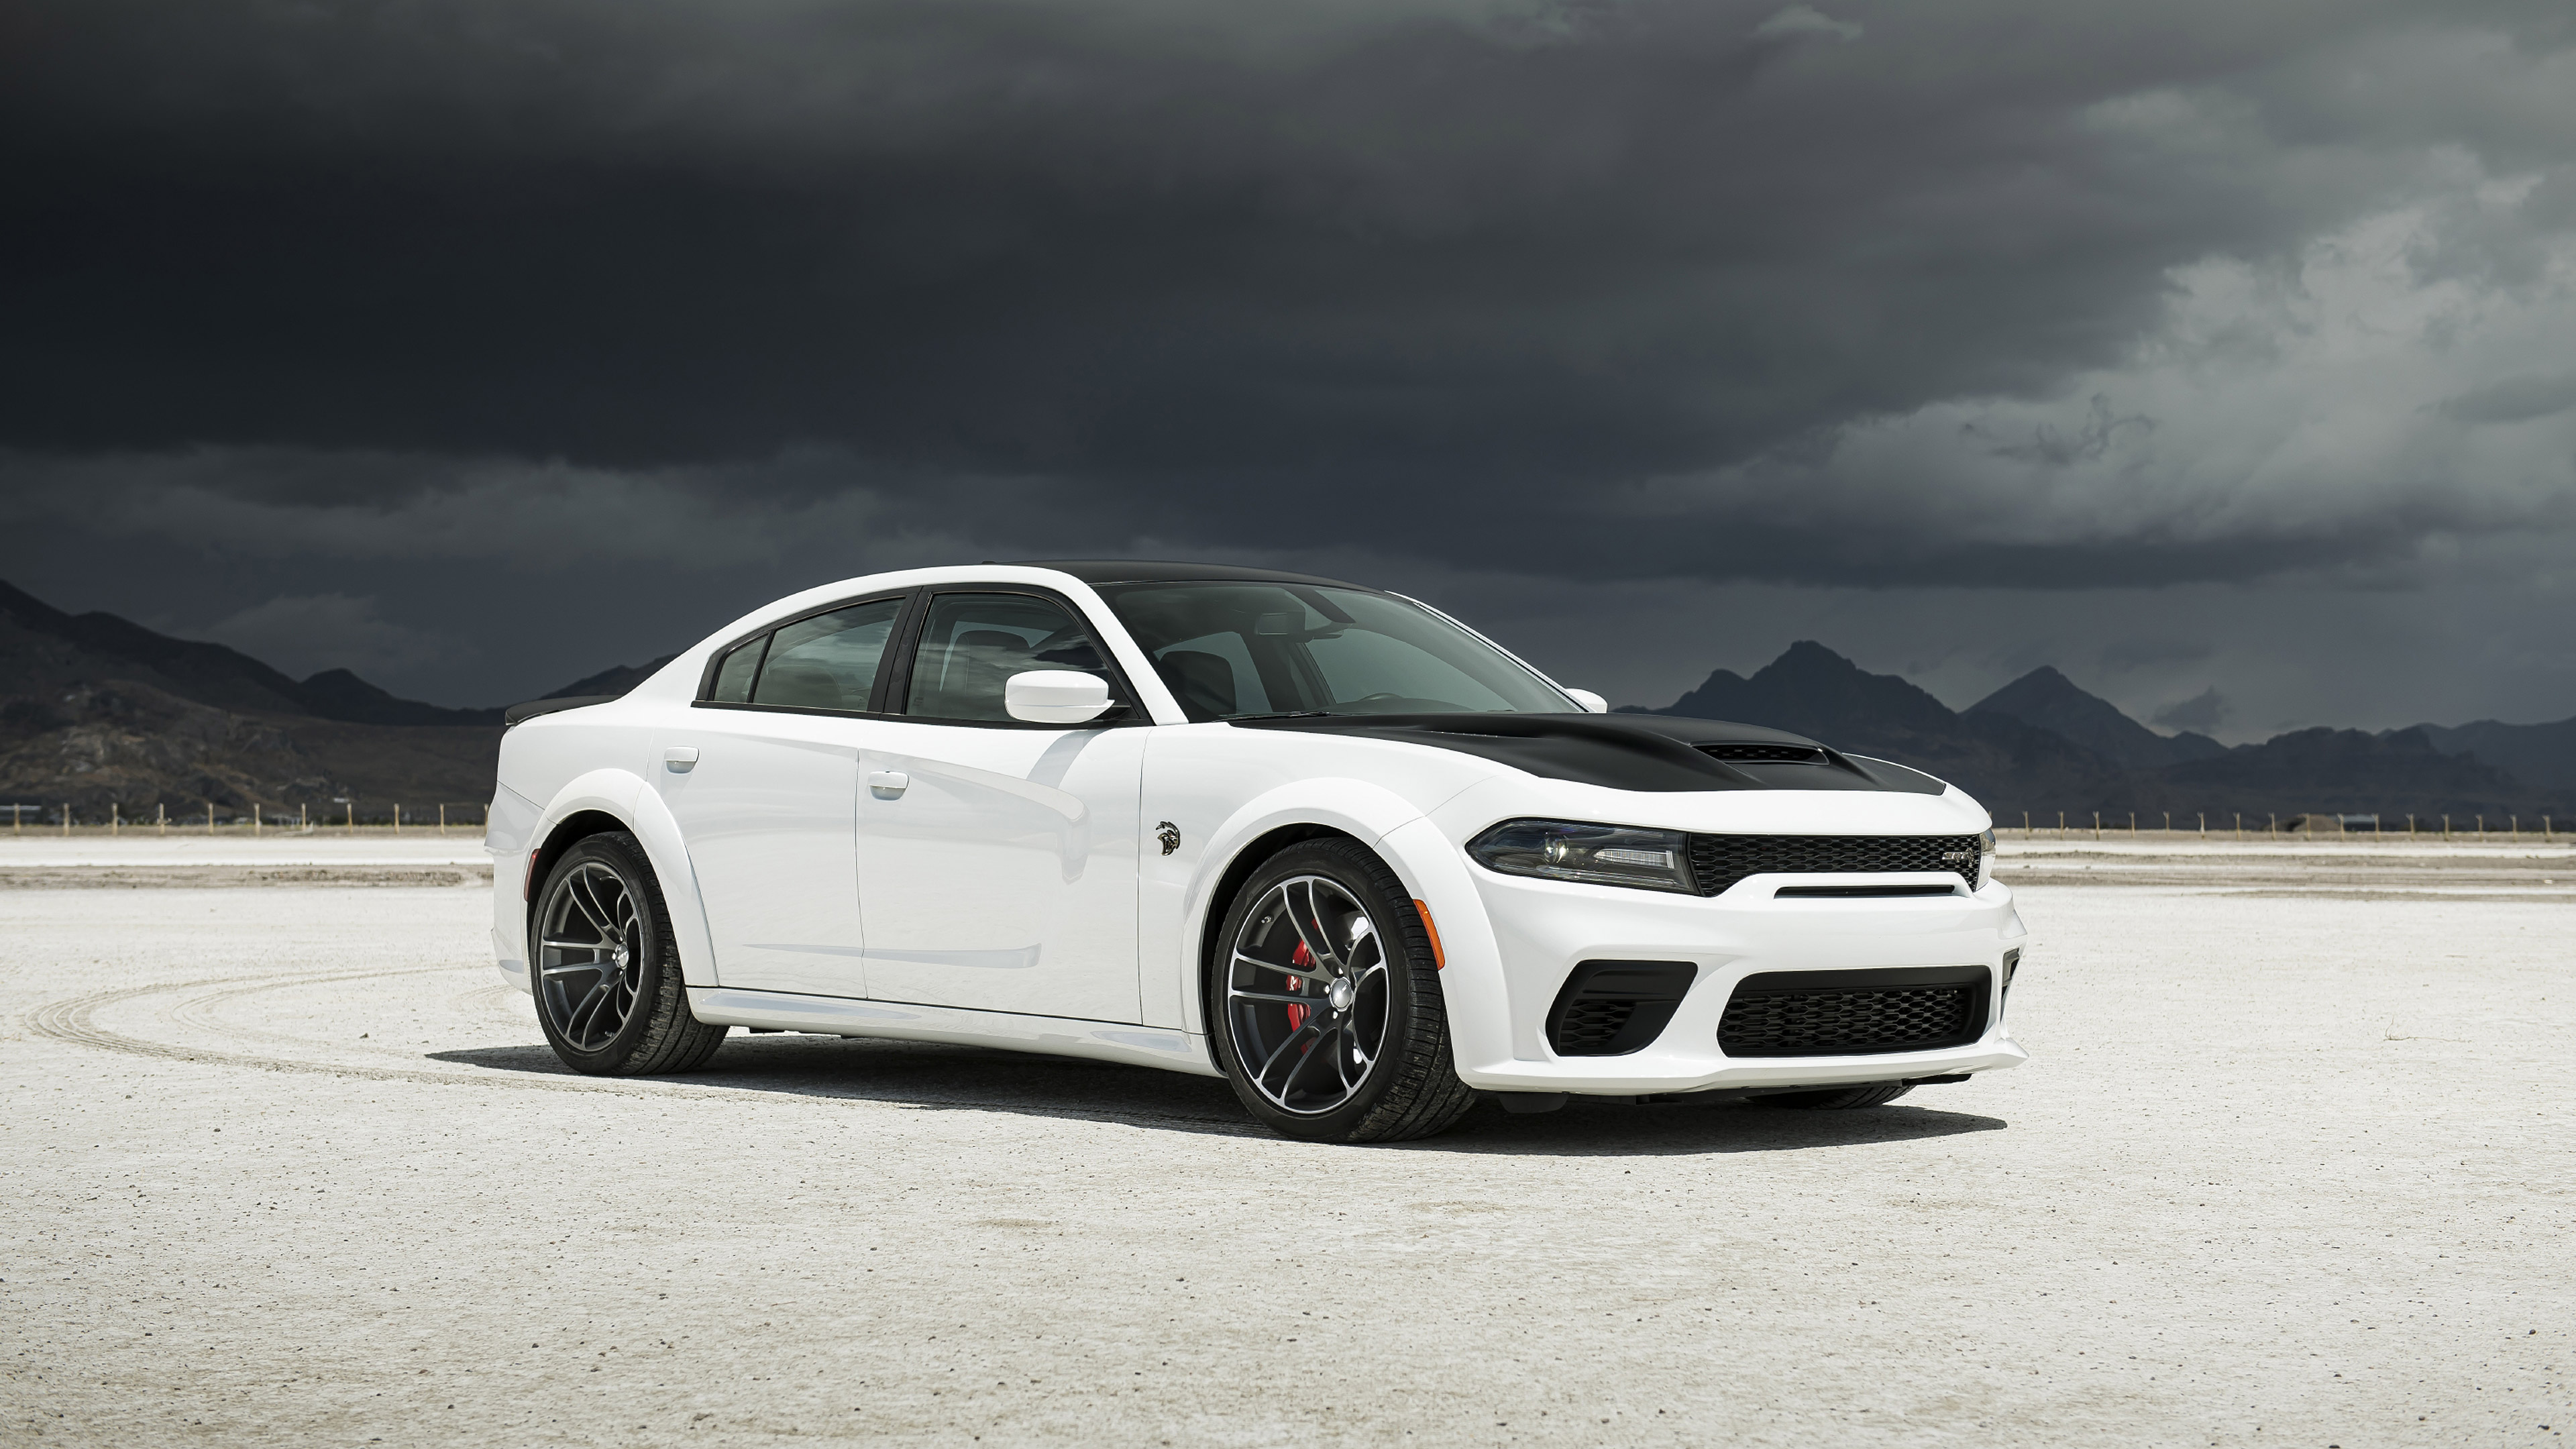 Car Coupe Dodge Charger Srt Hellcat Redeye Muscle Car White Car 3840x2160